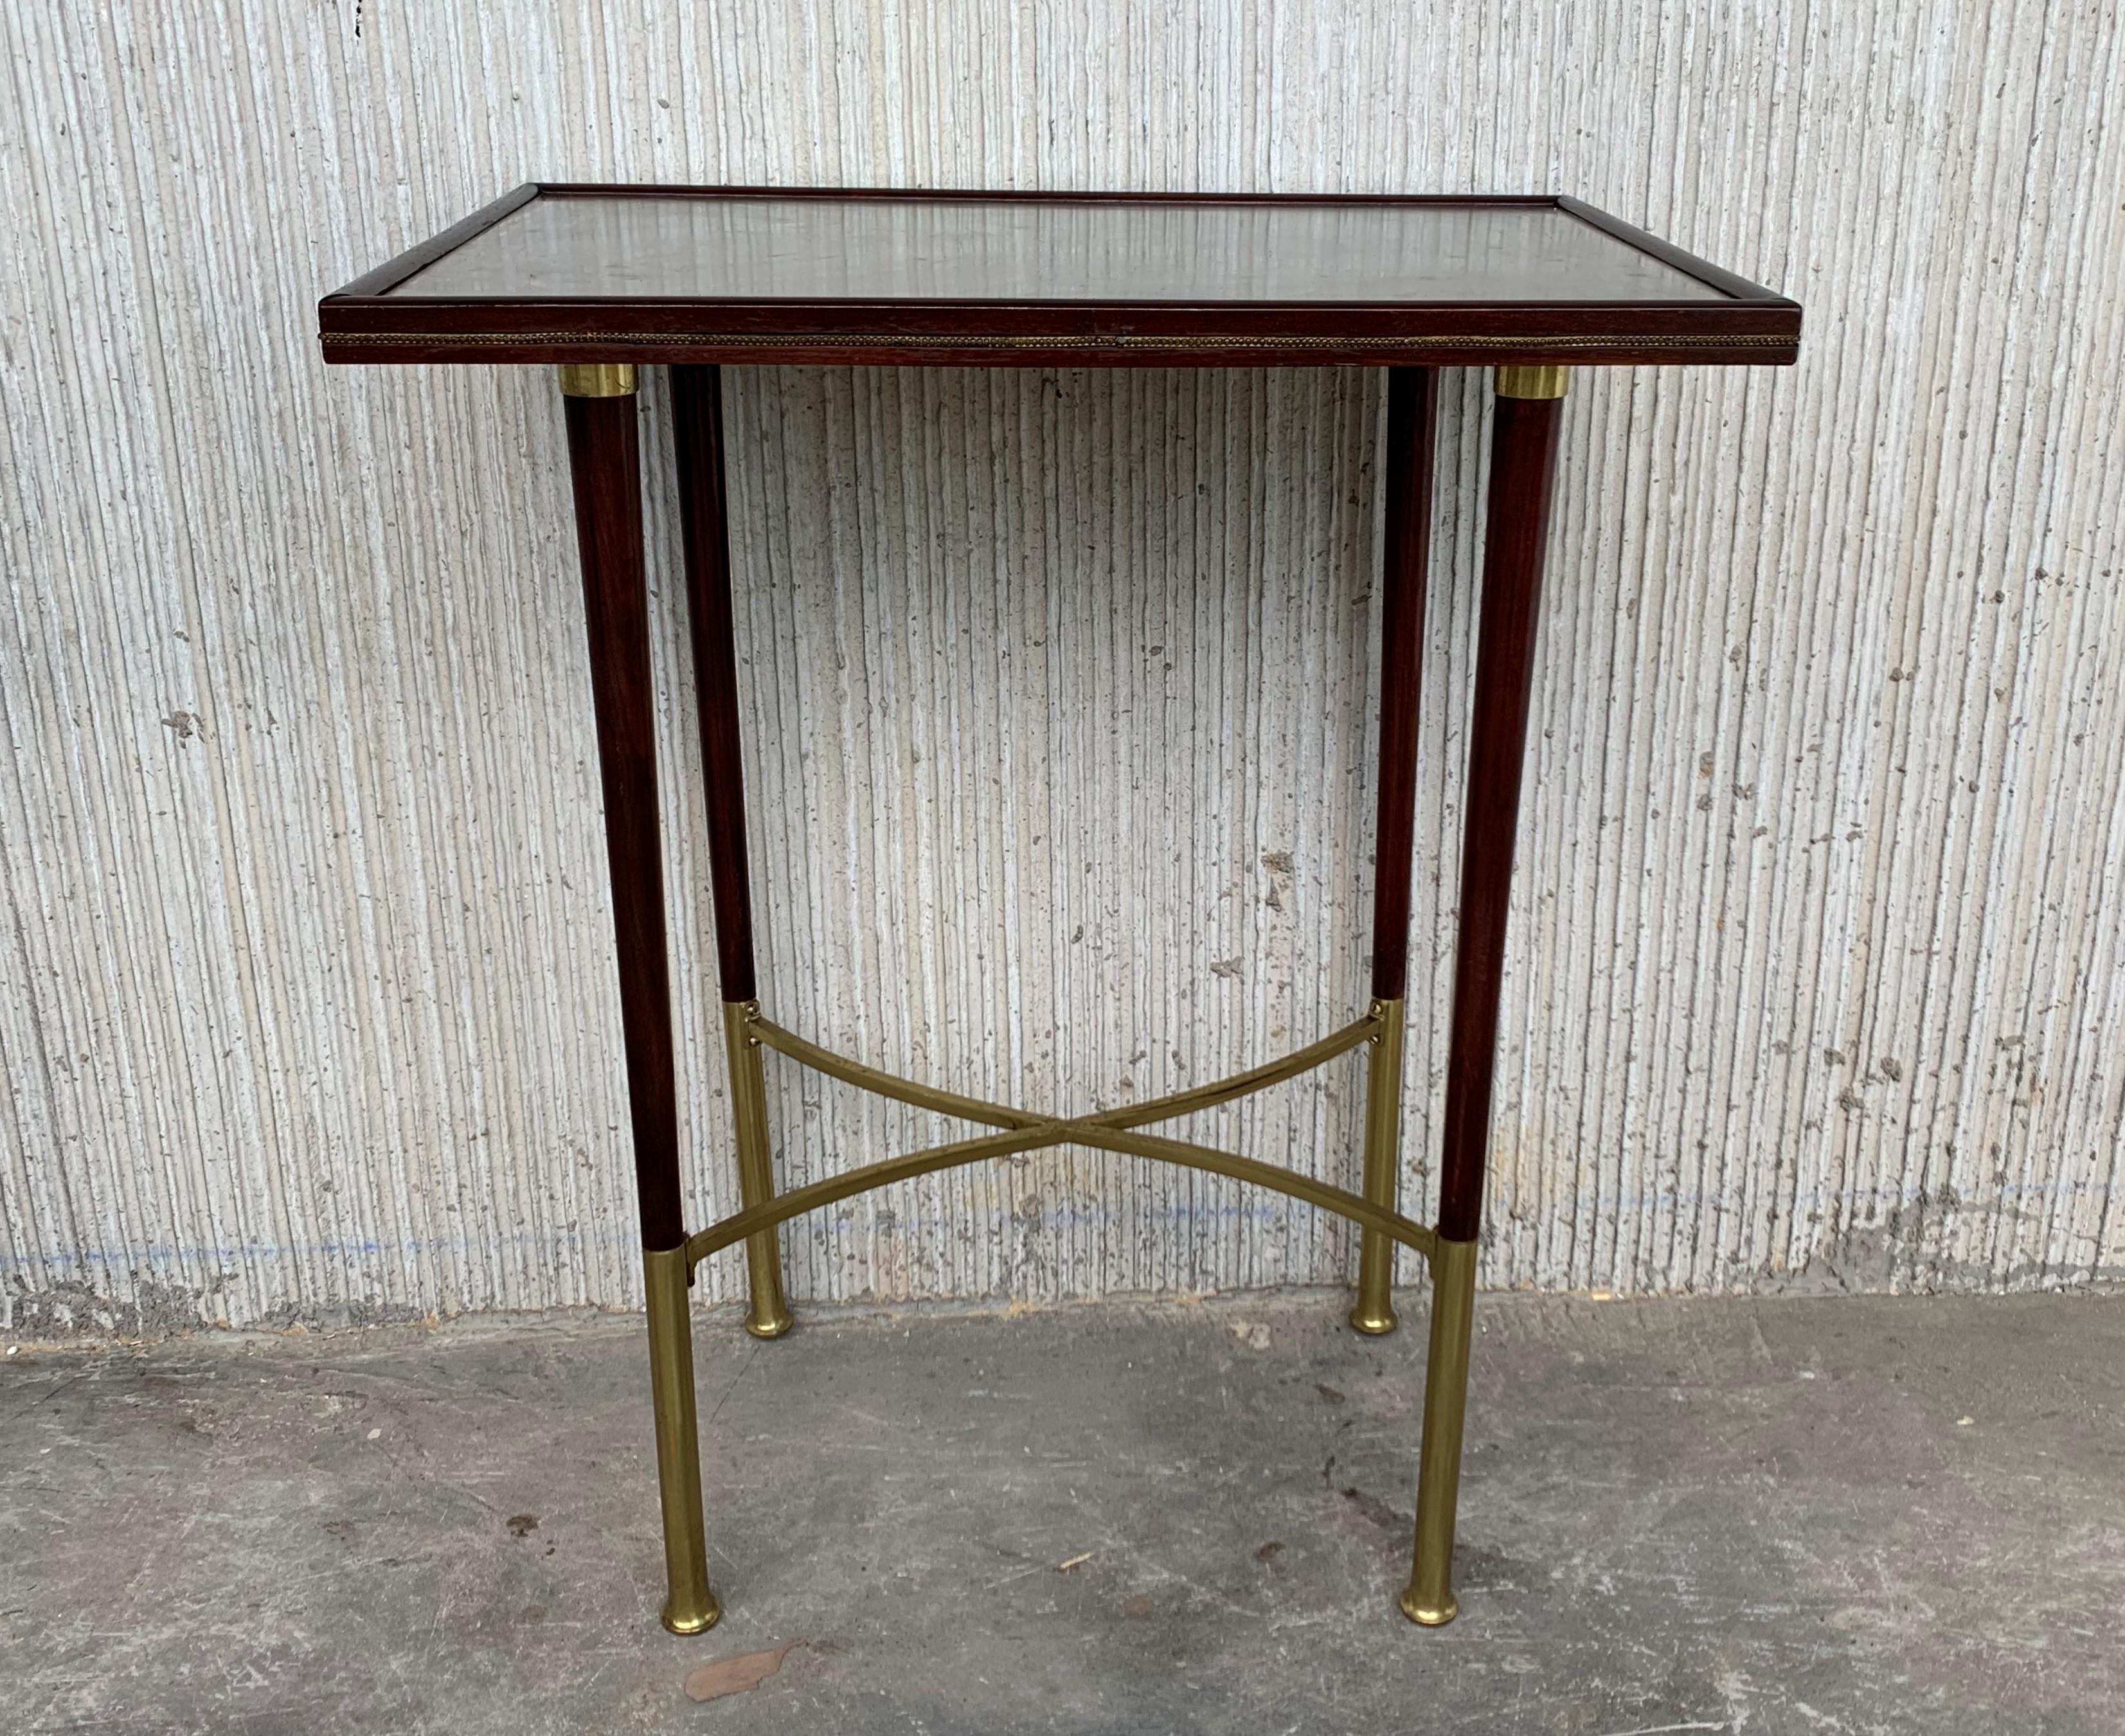 Art Deco top side table with mahogany top covered with a glass and tapered legs with brass feet joined with a cross piece.